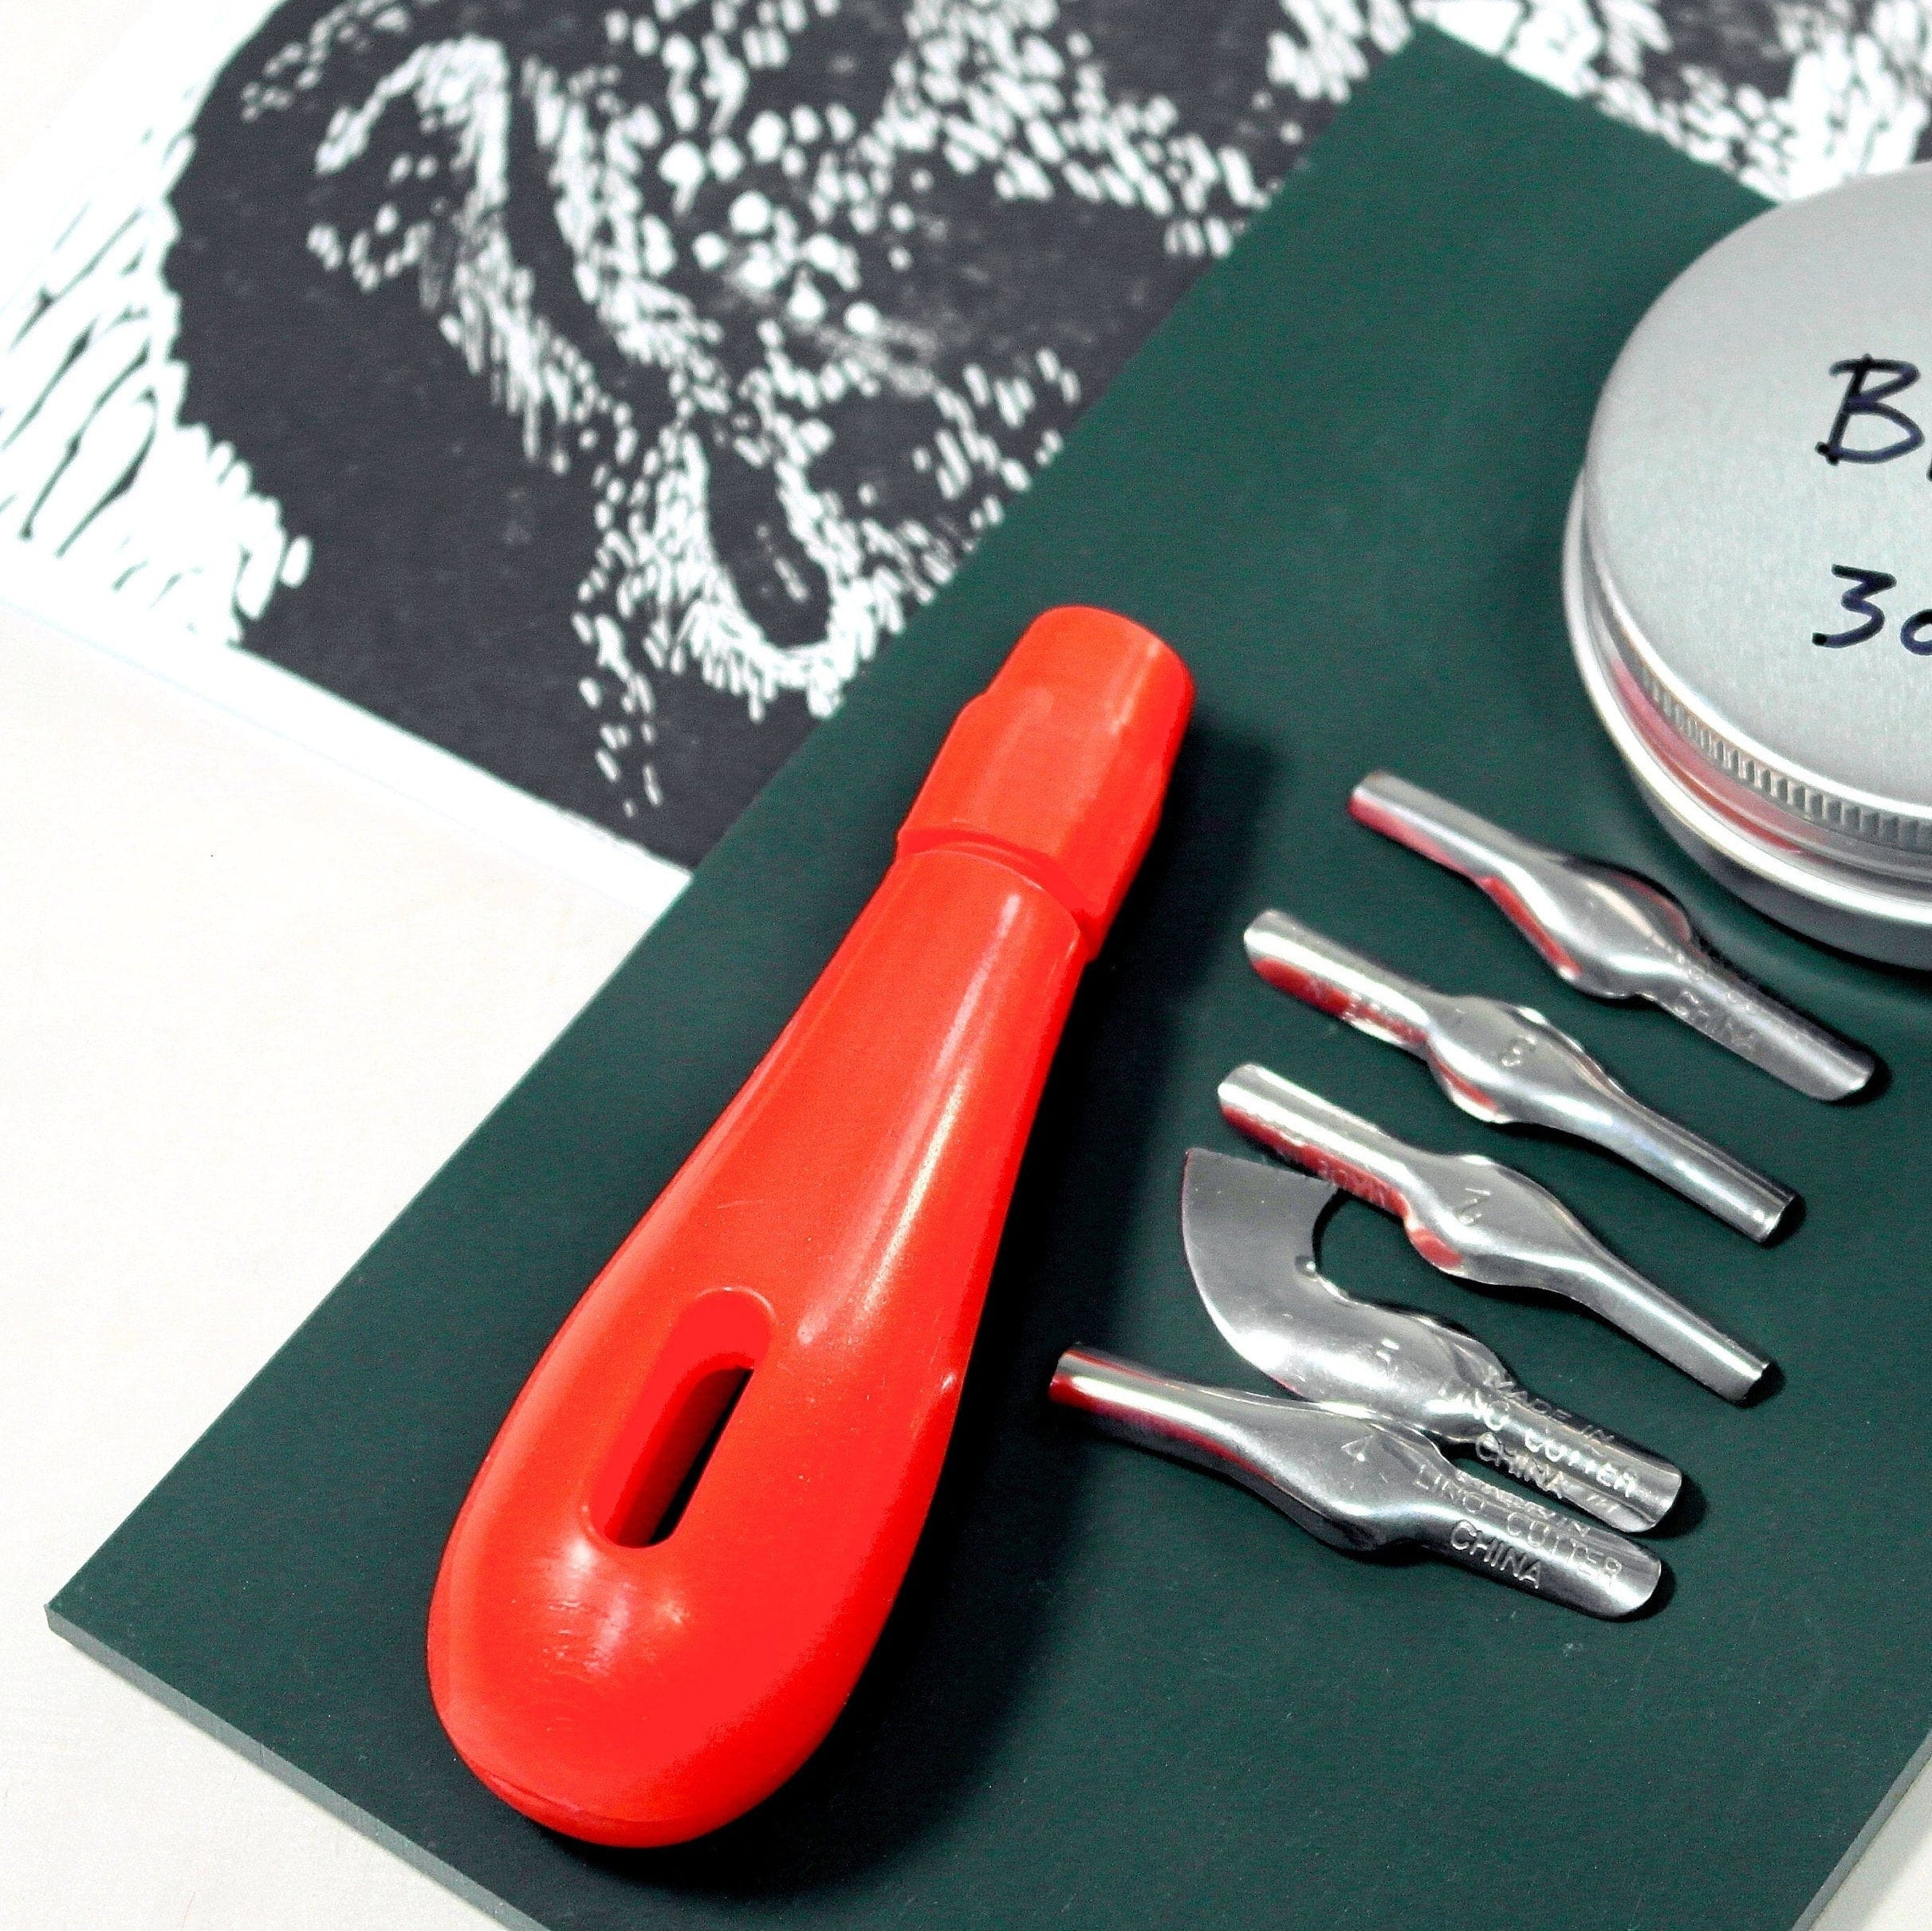 Choosing a set of tools for linocut - A tutorial by Linocutboy